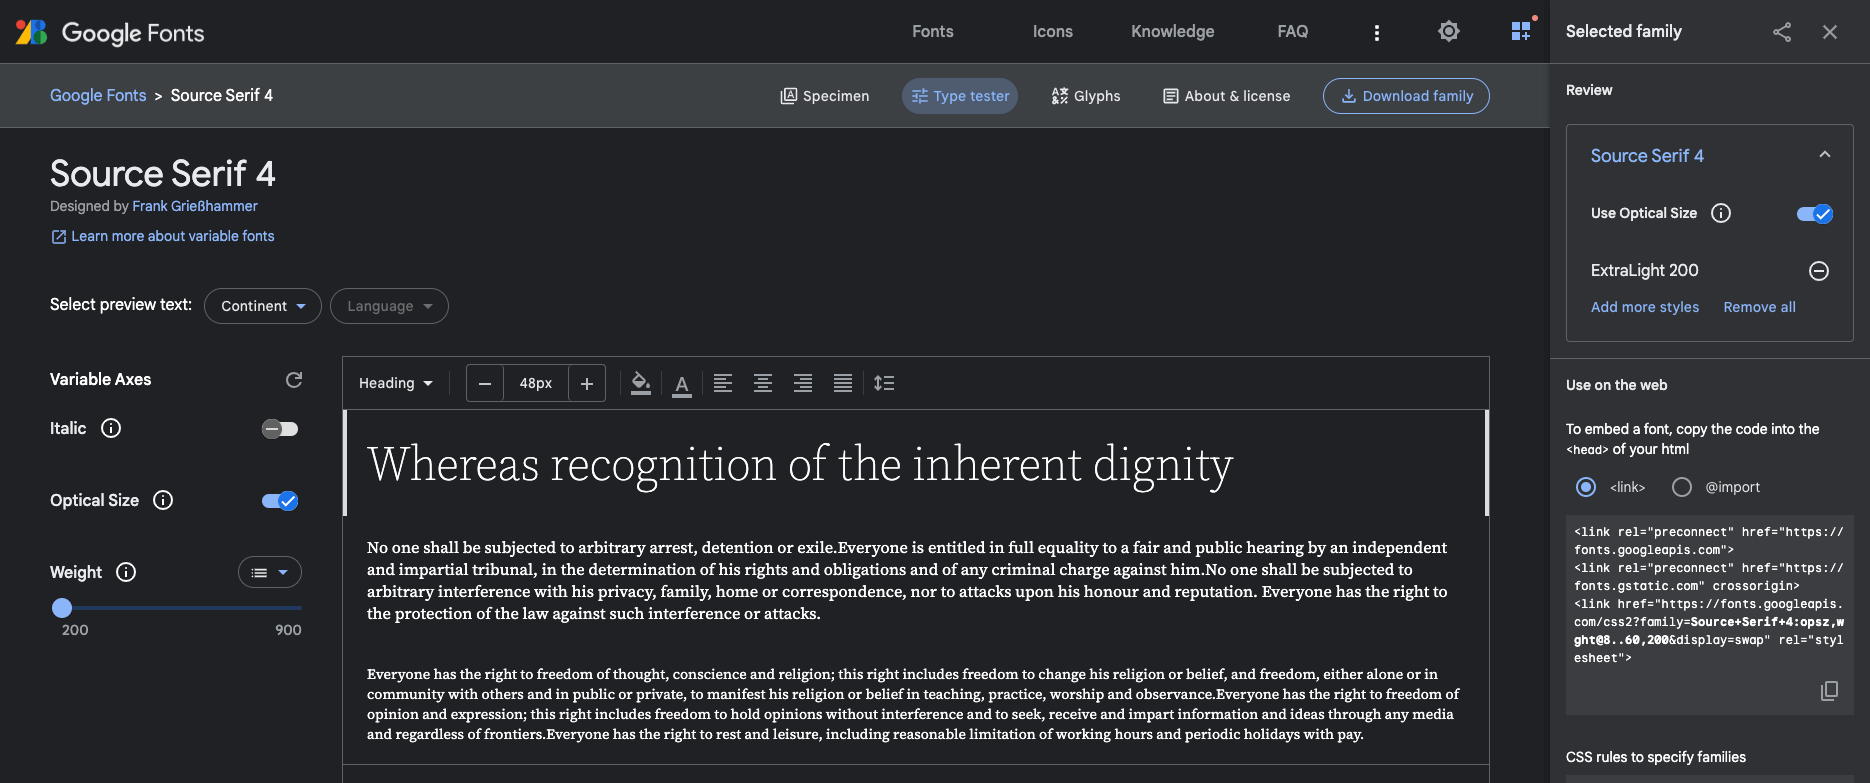 Source Serif 4 selected in the Google Fonts interface